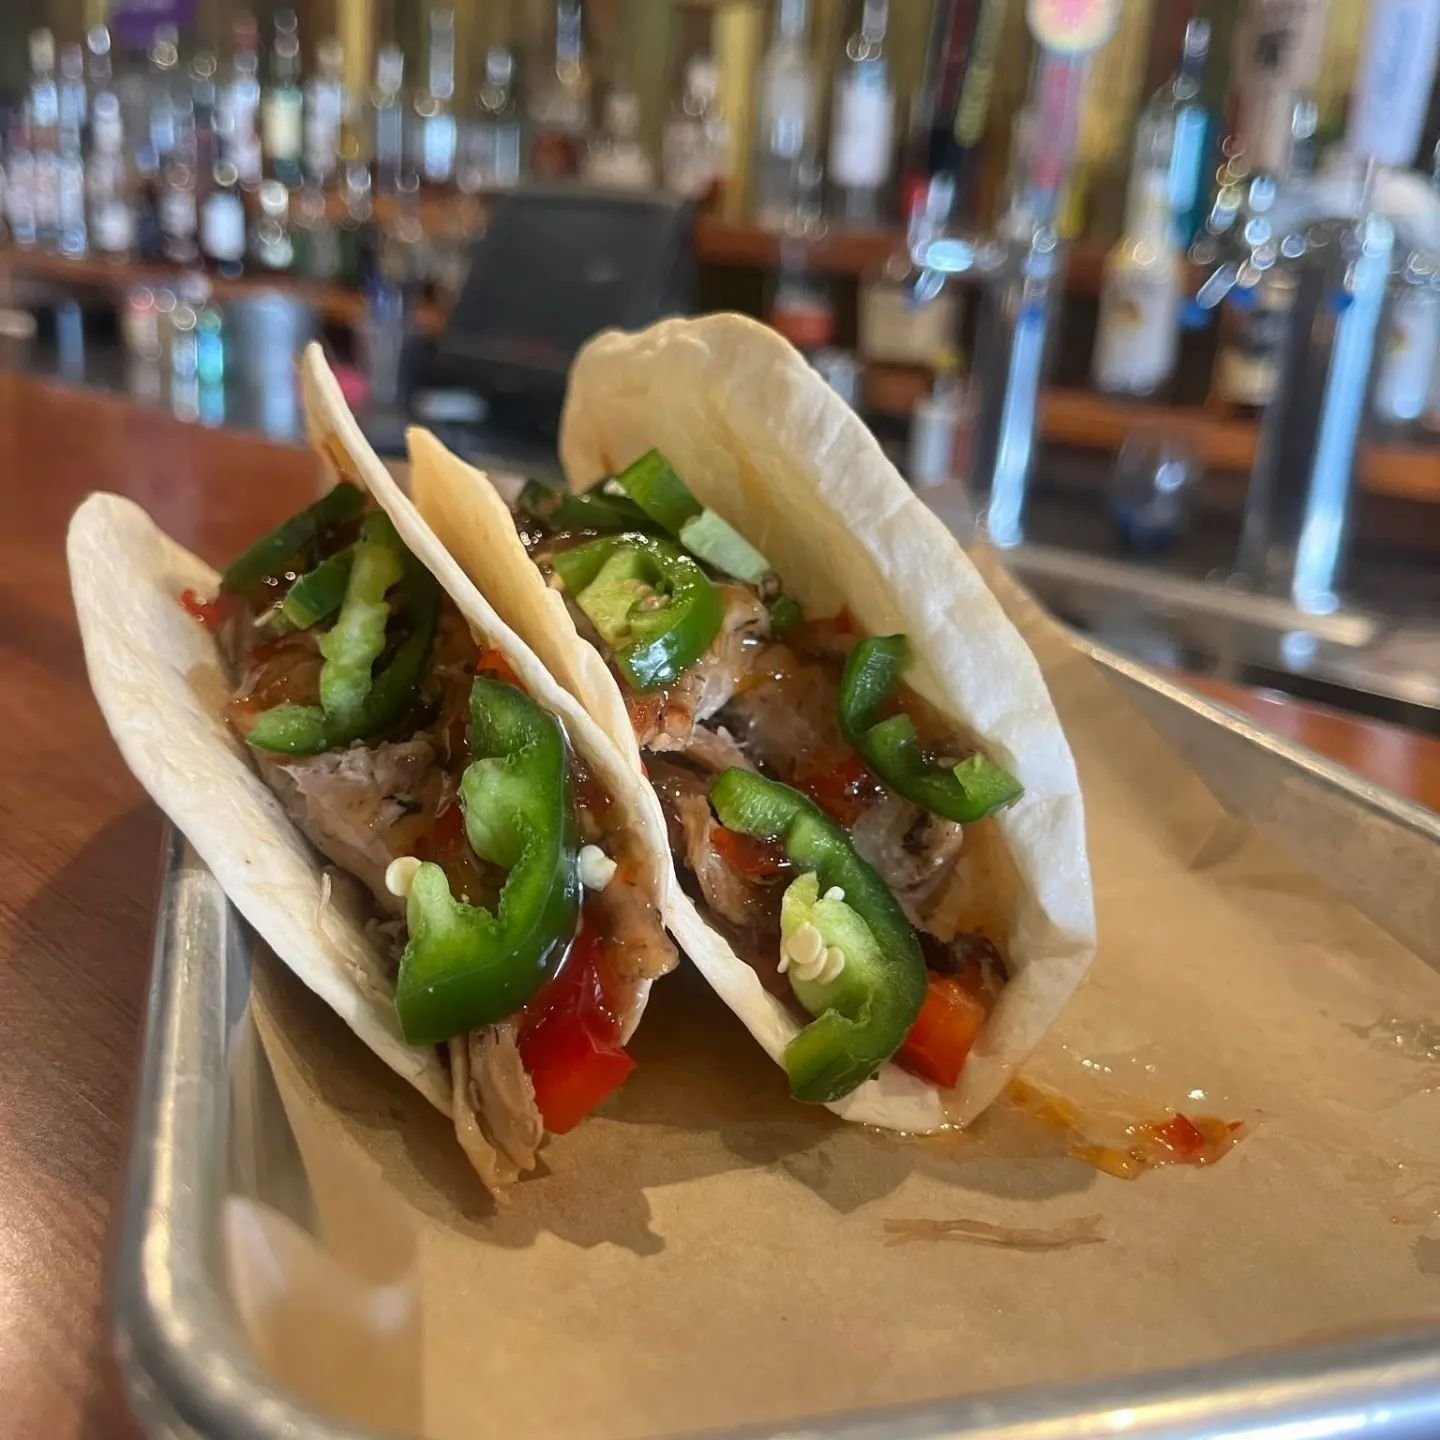 Pork n Peppers! Sweet n spicy! Pulled pork tacos on a bed of sweet bell peppers topped with fresh jalape&ntilde;os, drizzle on some sweet chilli sauce to tie it all together!